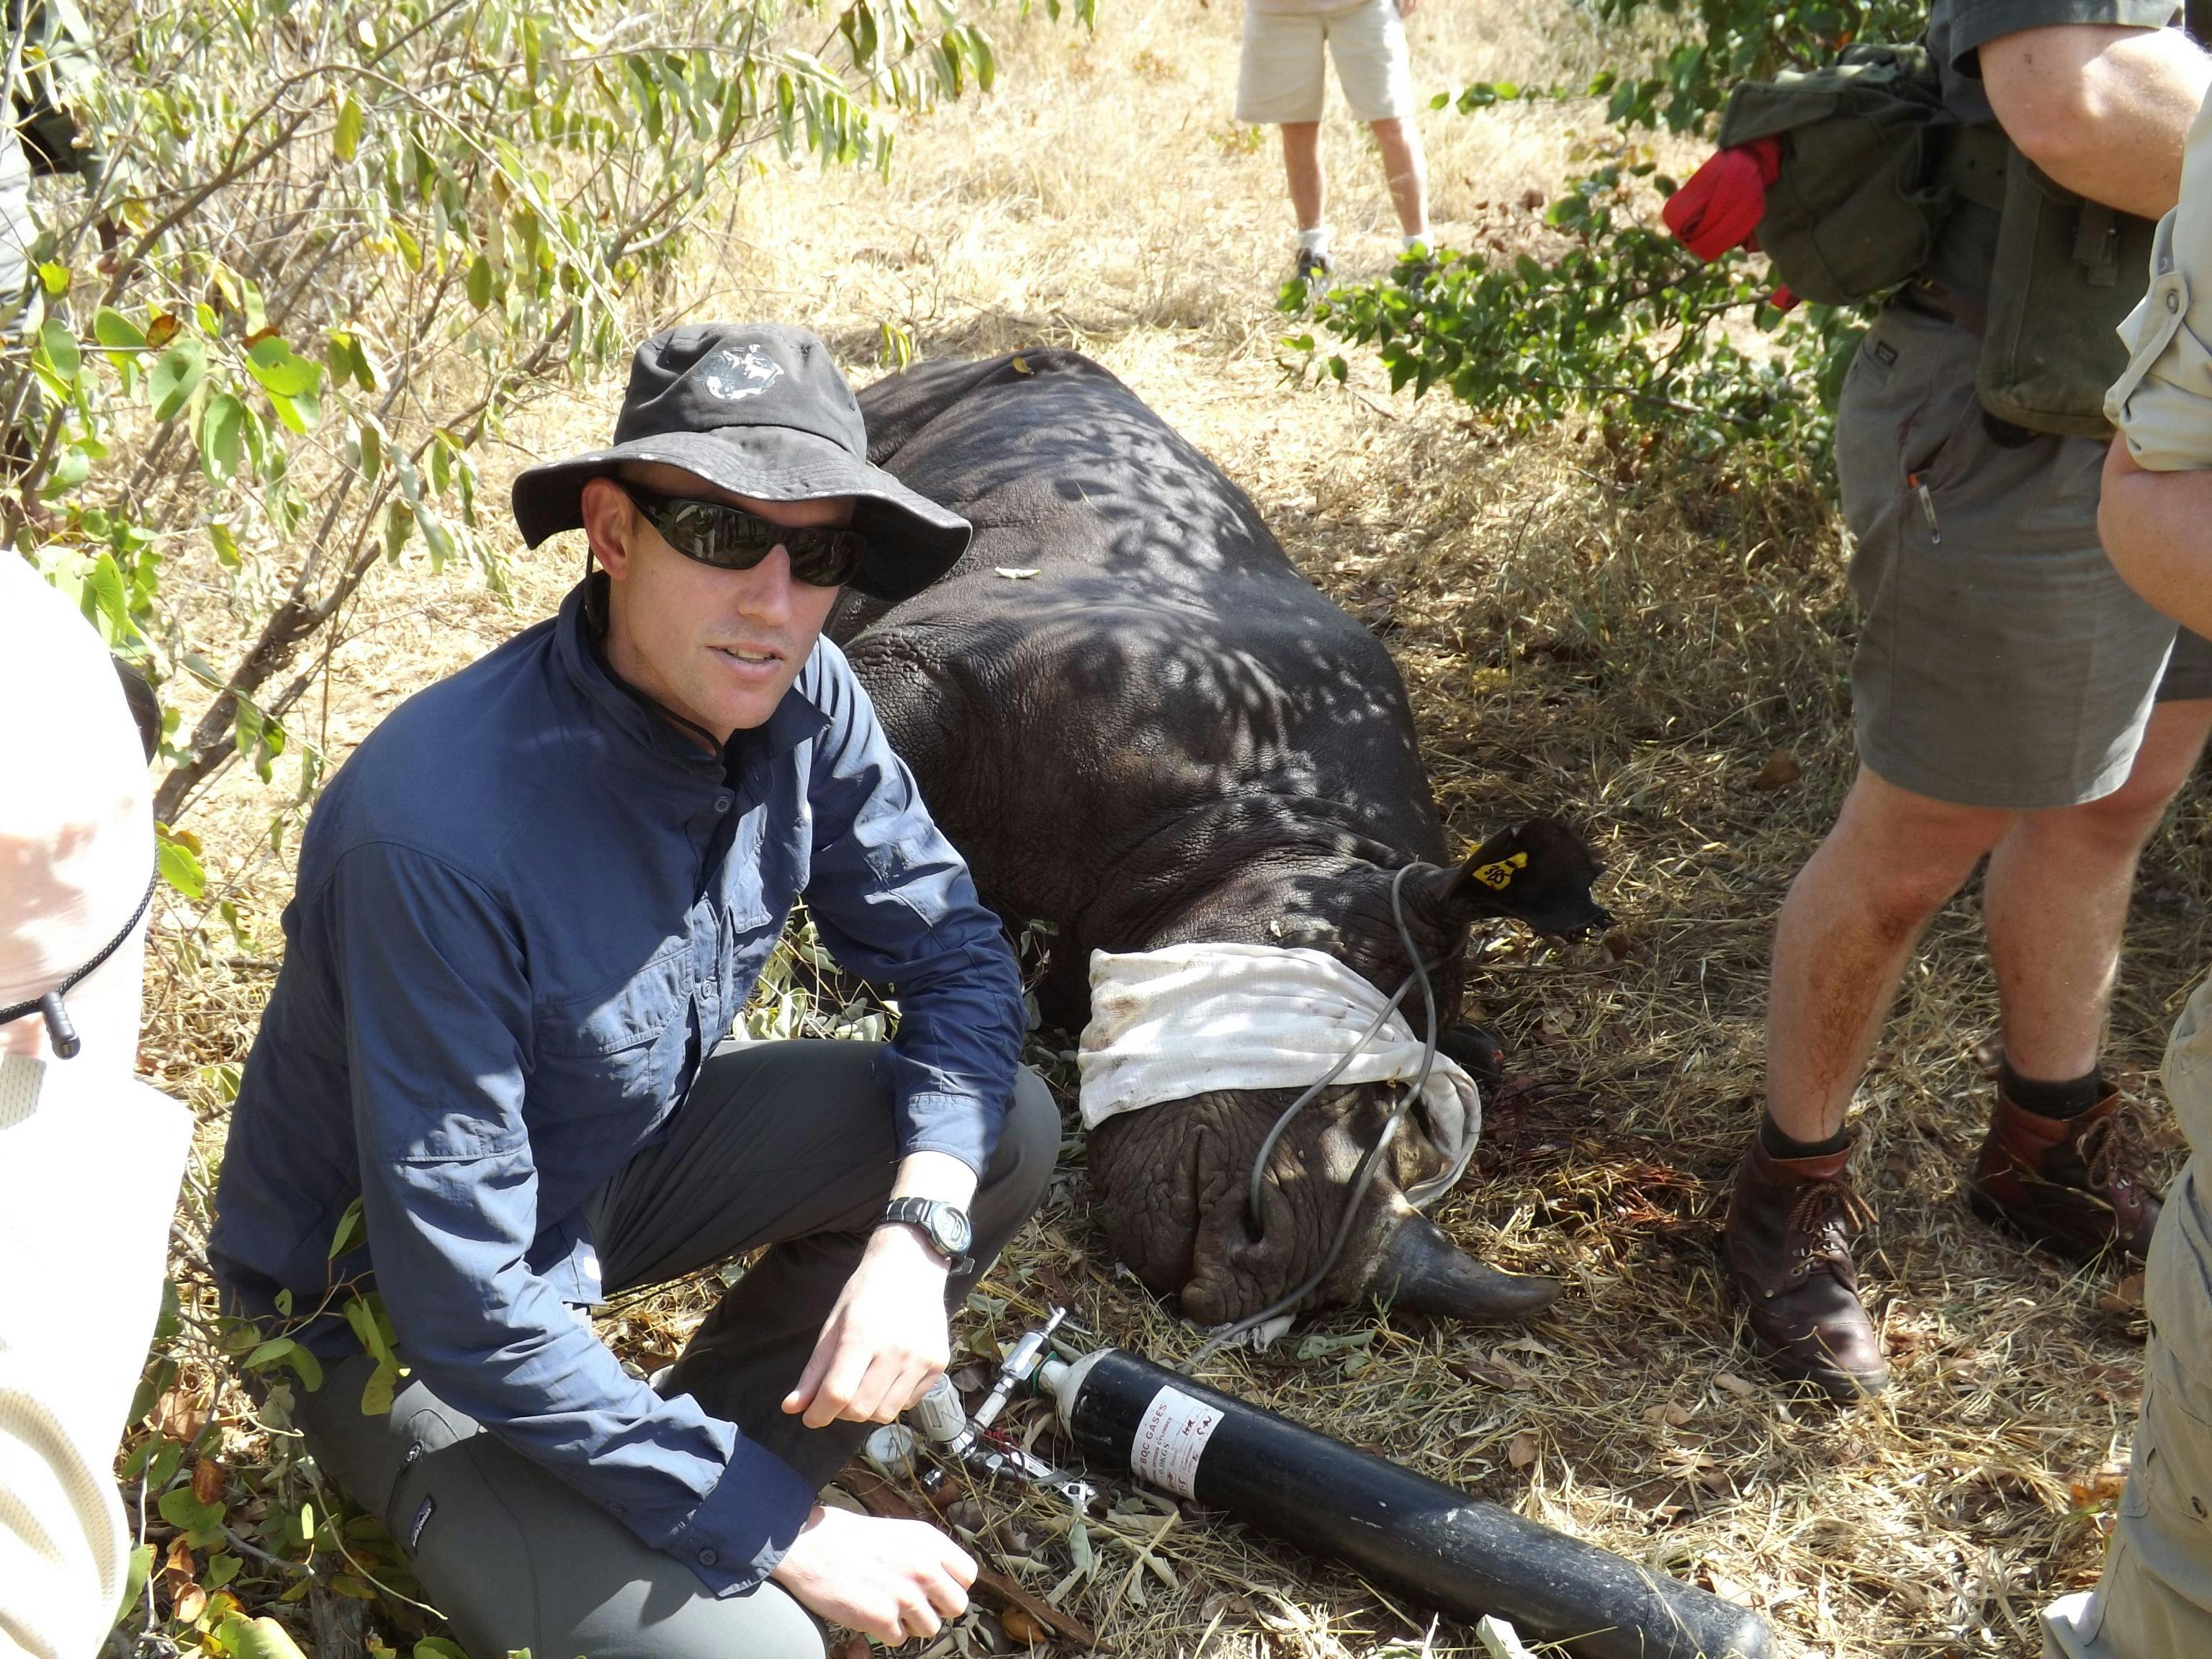 Cameron Murray, BSc, BVMS, working with wildlife in Africa (Image Courtesy of Cameron Murray)